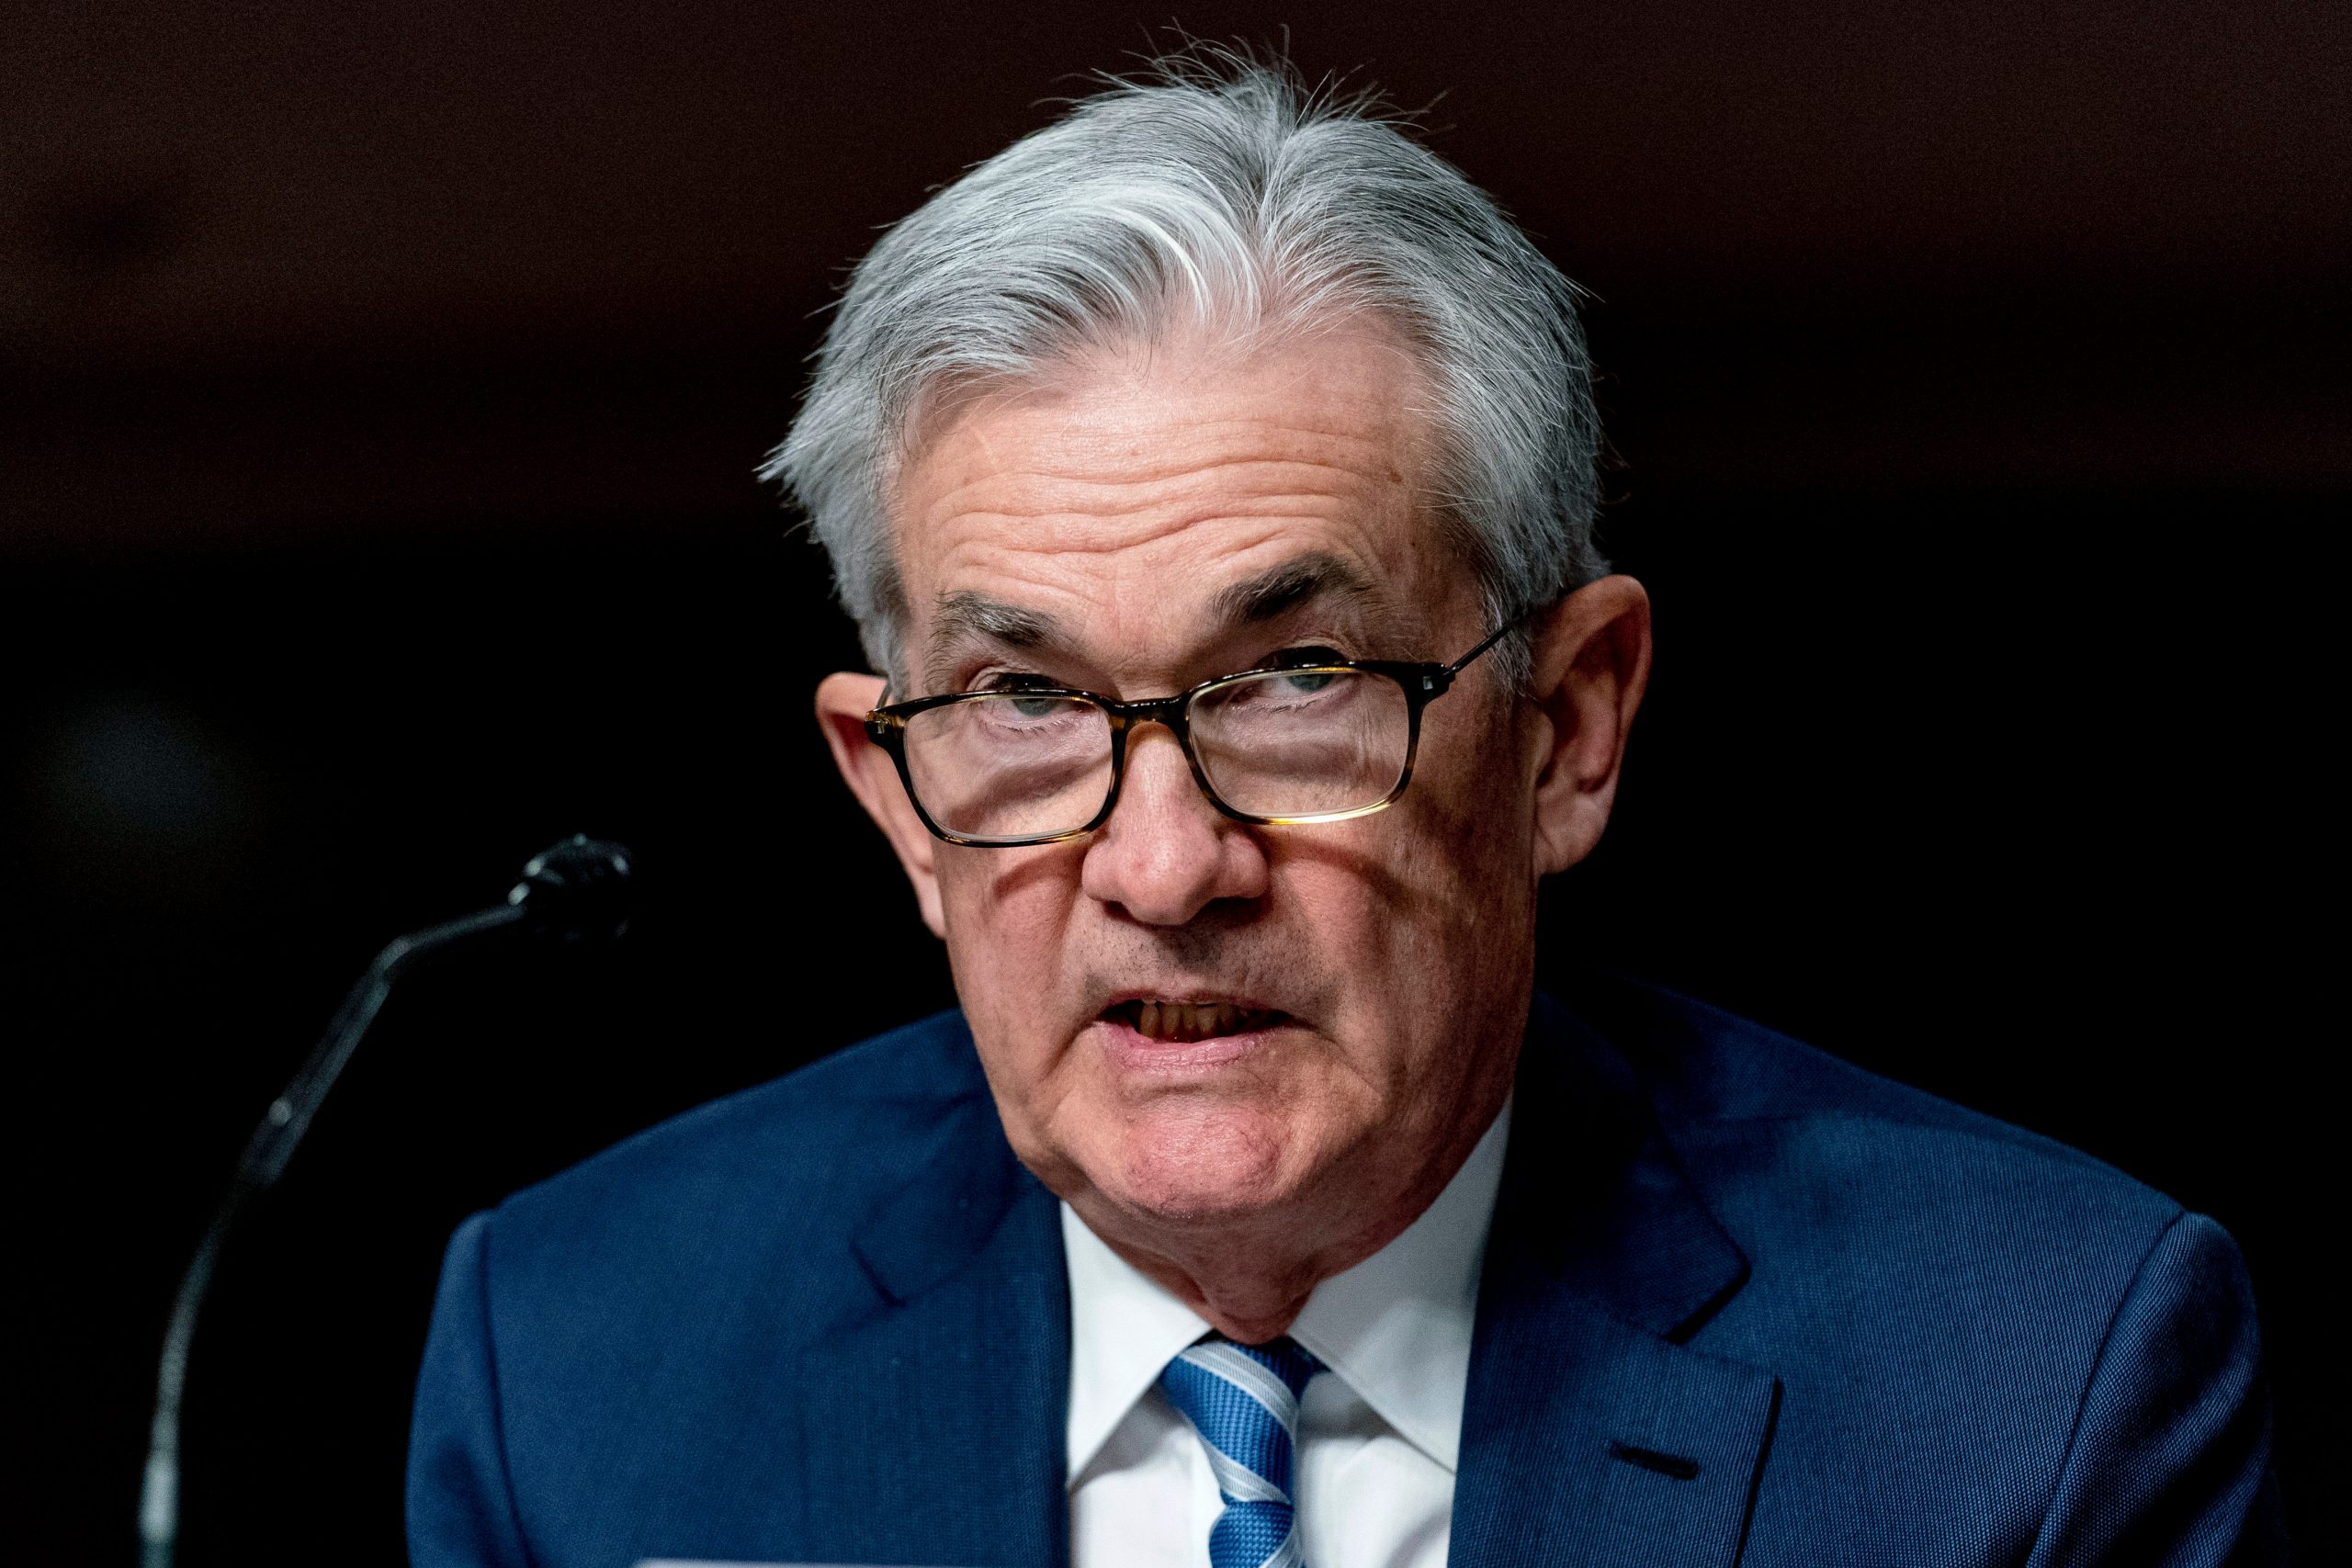 Federal Reserve plans to raise rates as soon as March to cool inflation